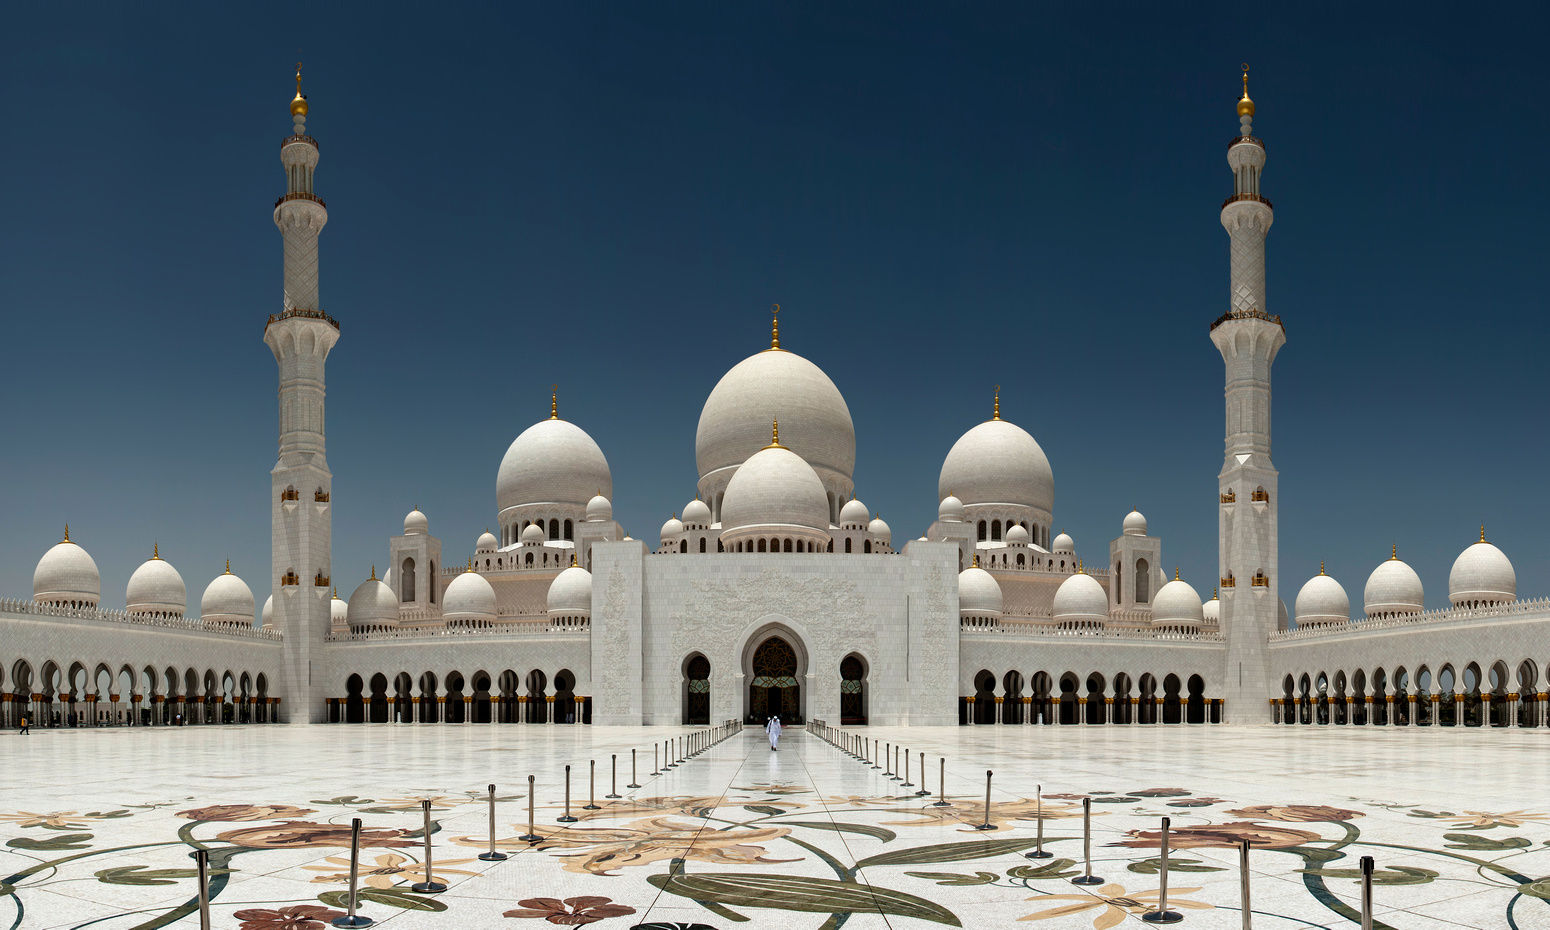 Sheikh Zayed Grand Mosque entrance courtyard frontal perfect symetry